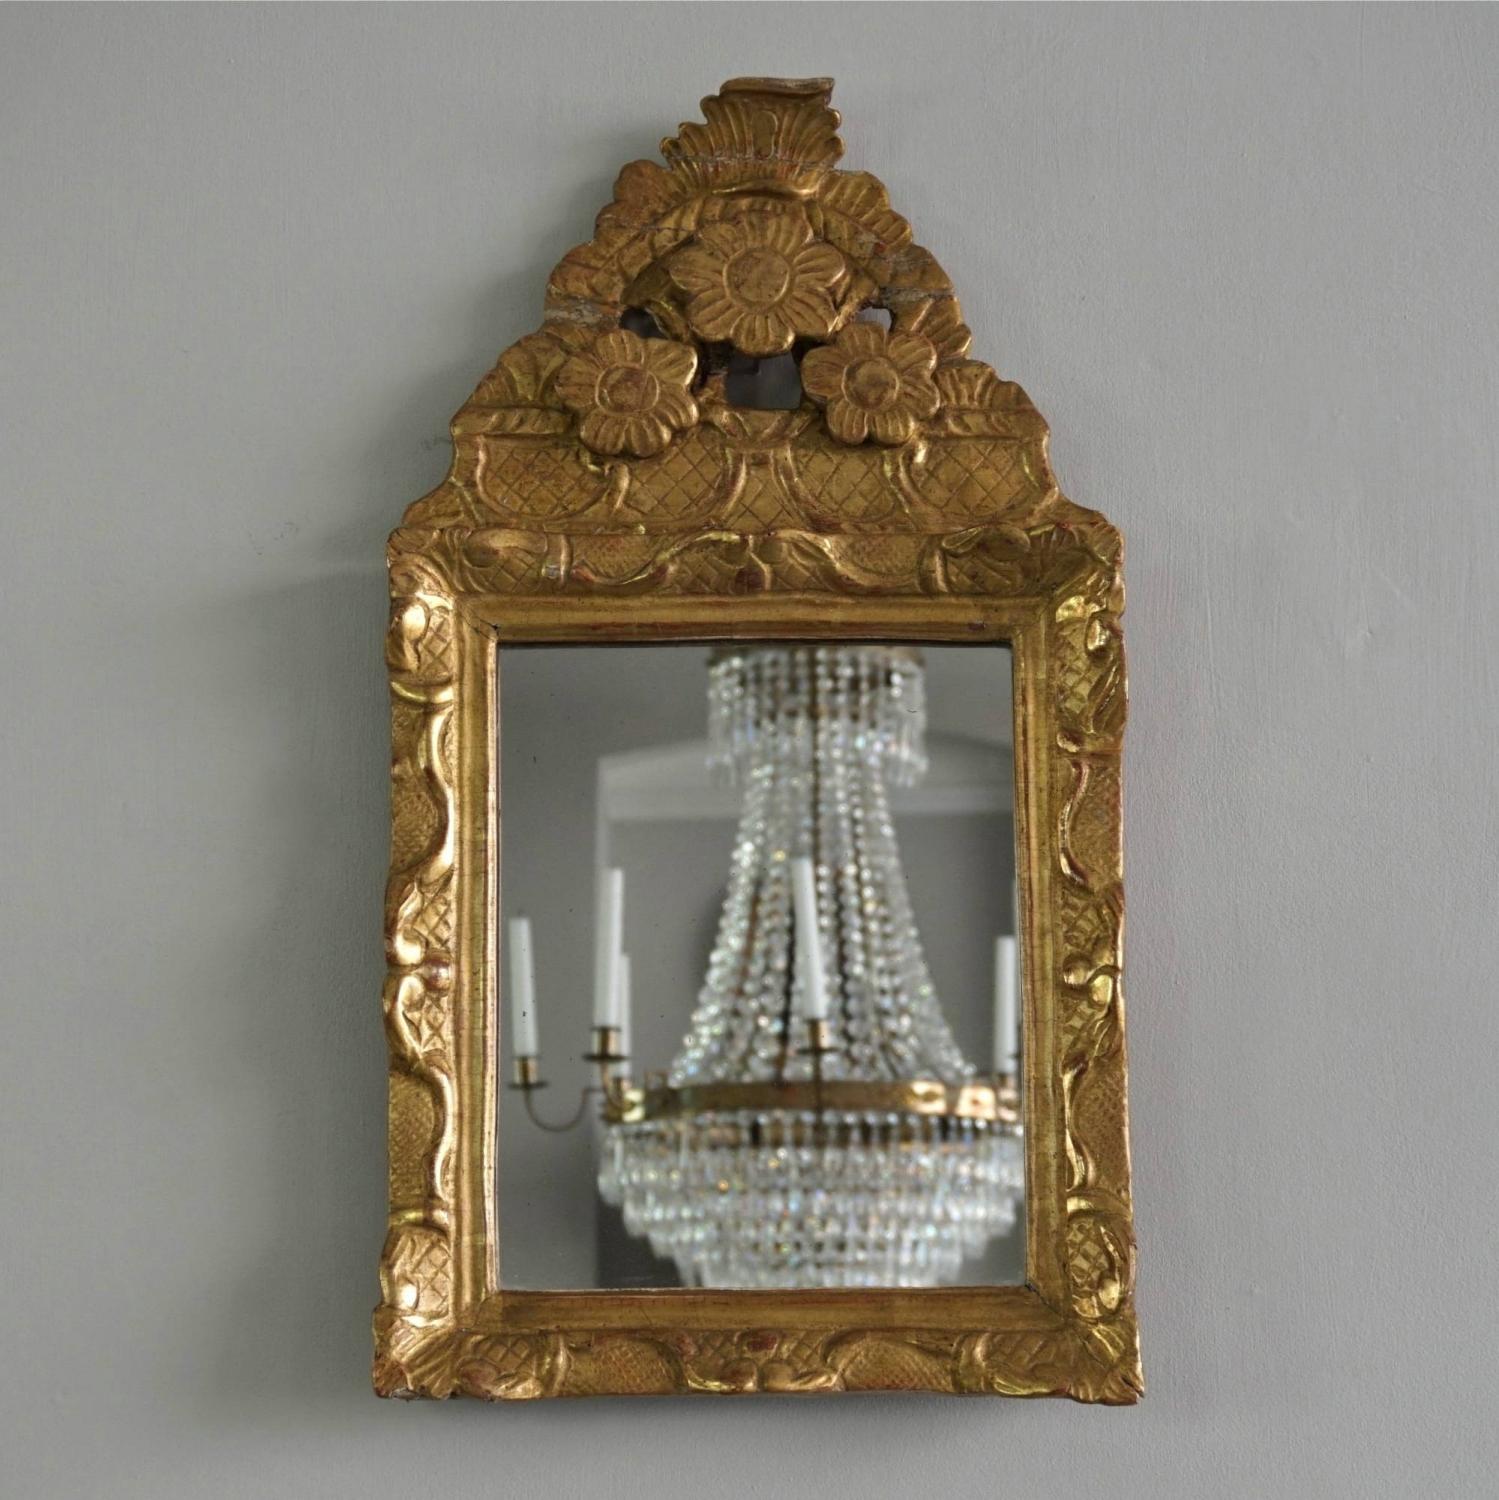 EXCEPTIONAL 18TH CENTURY FRENCH GILDED MIRROR